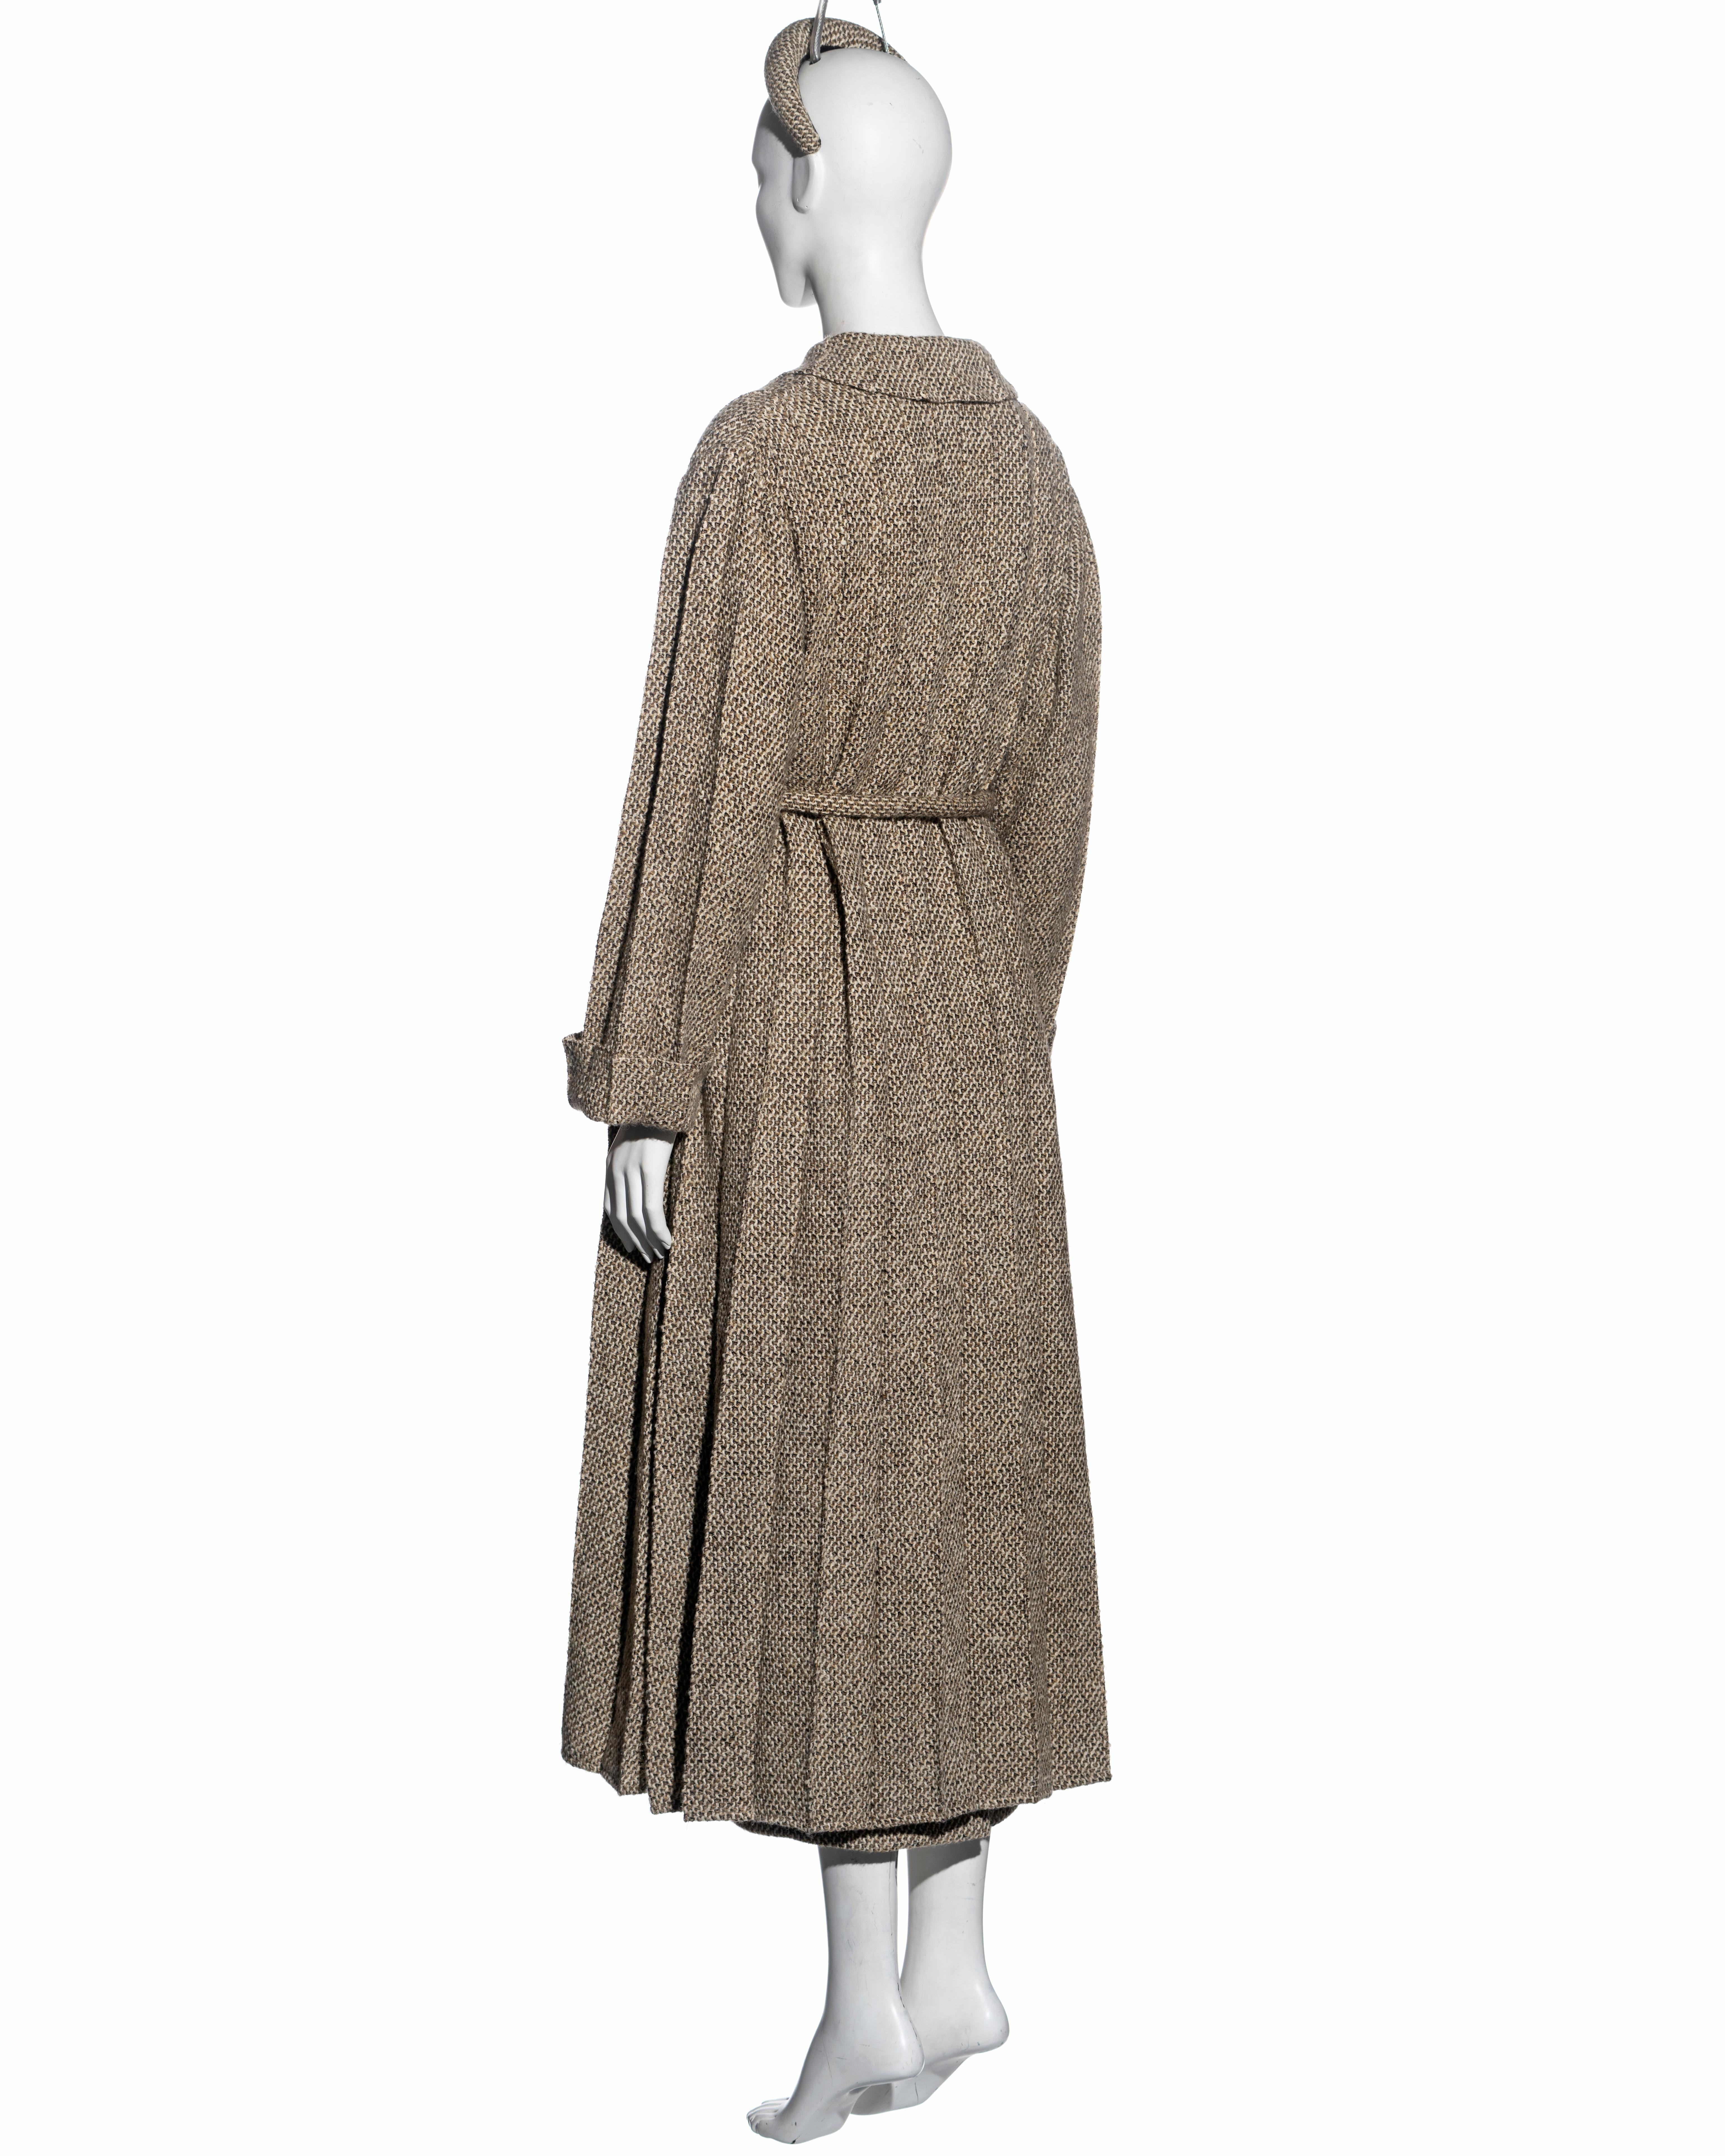 Chanel by Karl Lagerfeld brown tweed pleated coat, skirt and hat set, fw 1998 For Sale 2